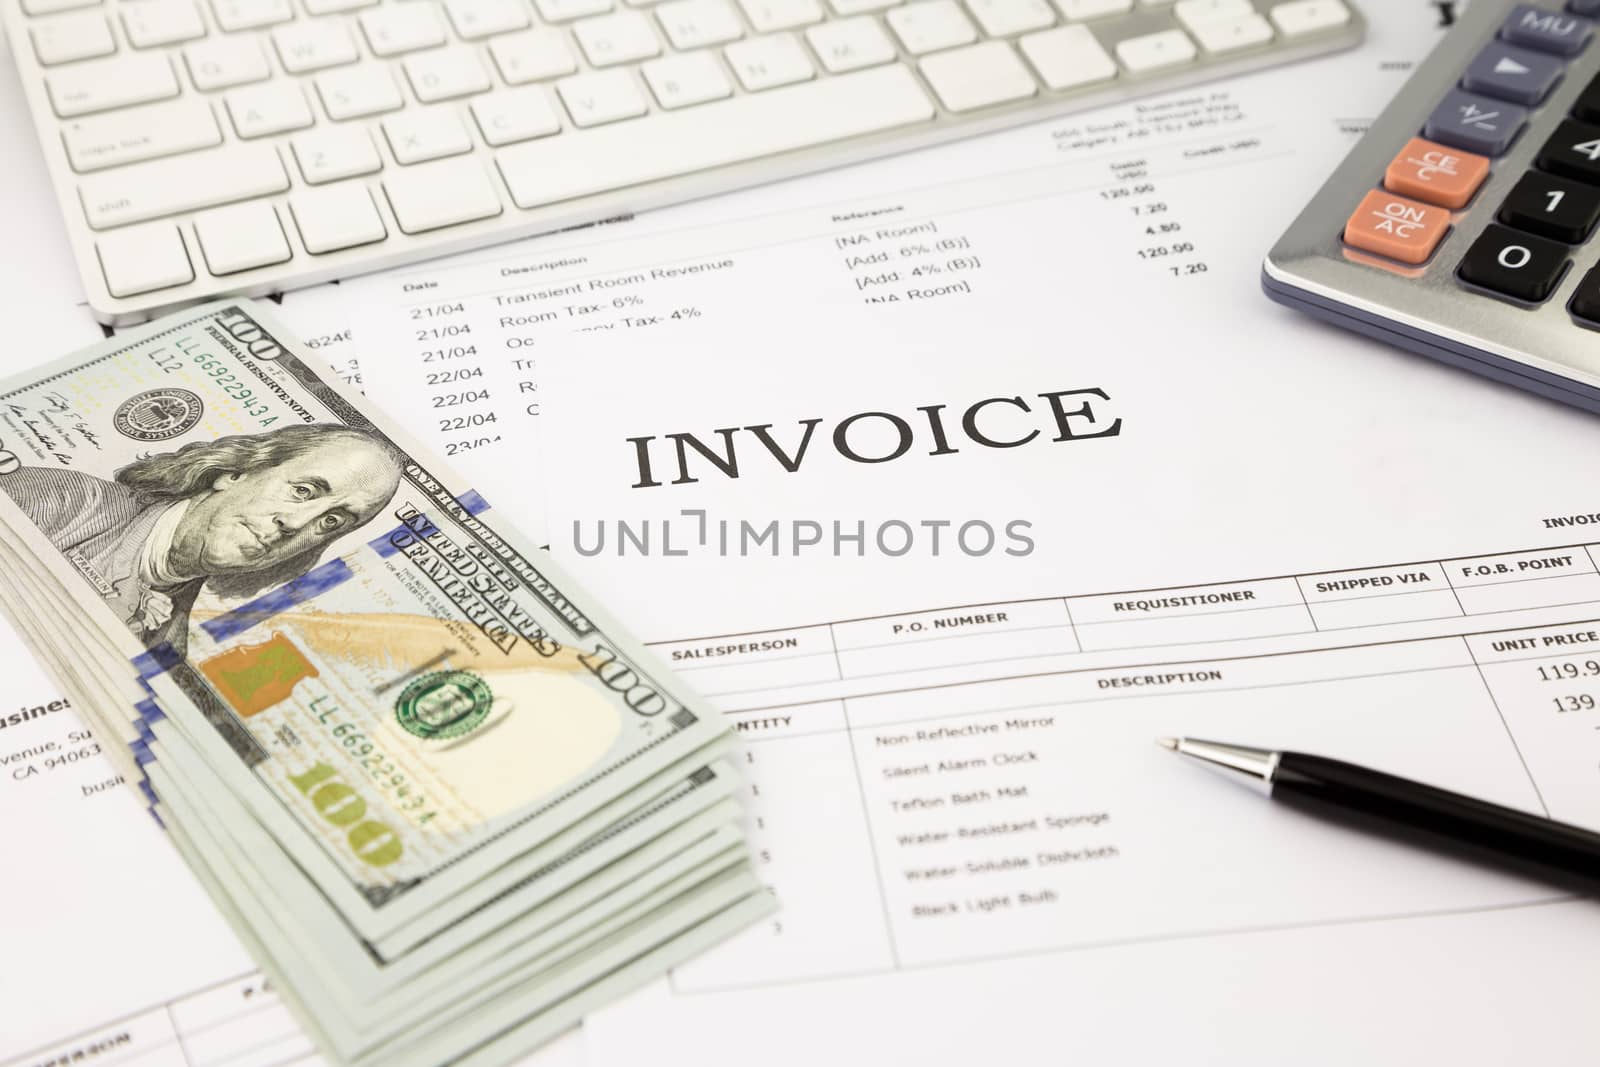 invoice documents  and dollar money banknotes on office table, business and financial concept